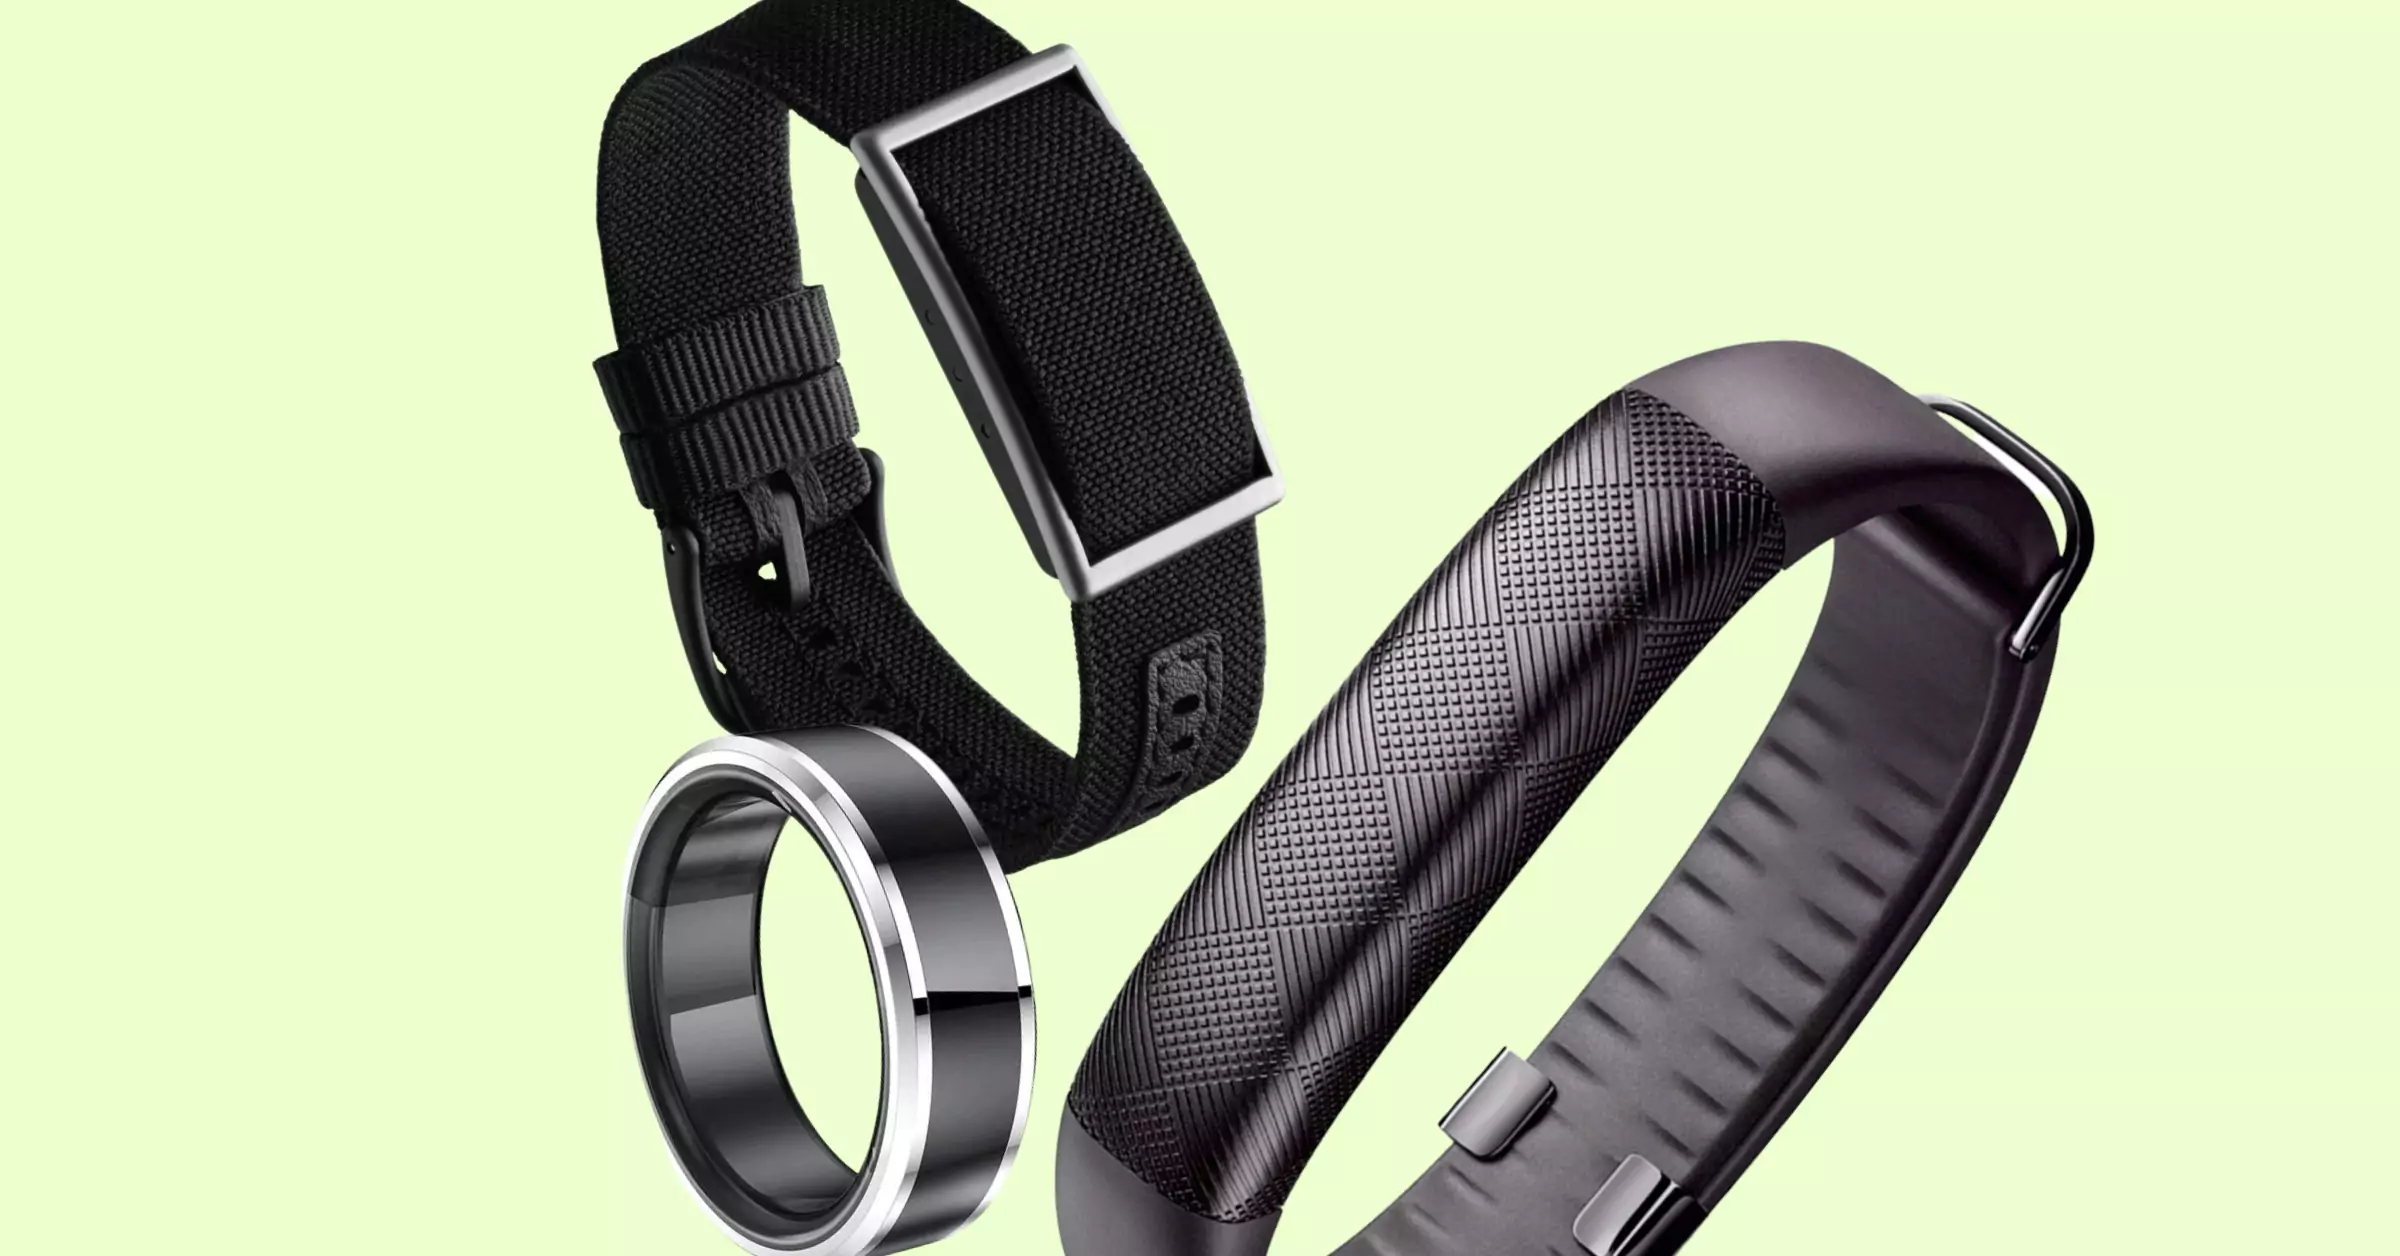 Misfit Ray review: A minimalist looking fitness tracker with decent features